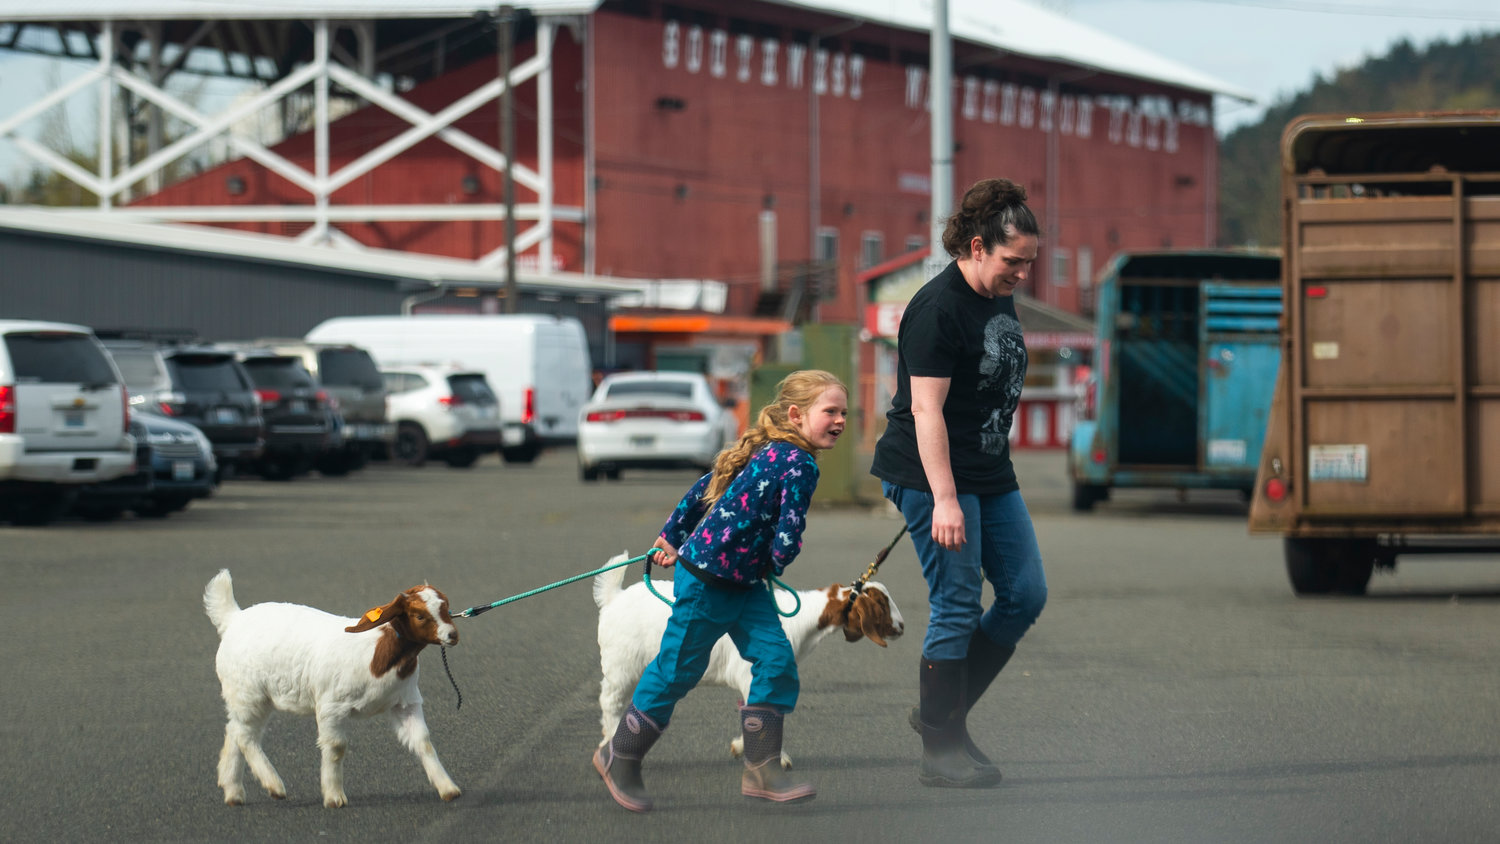 A young girl drags her goat into the Blue Pavilion at the Southwest Washington Fairgrounds before the Spring Youth Fair opens on Friday afternoon.